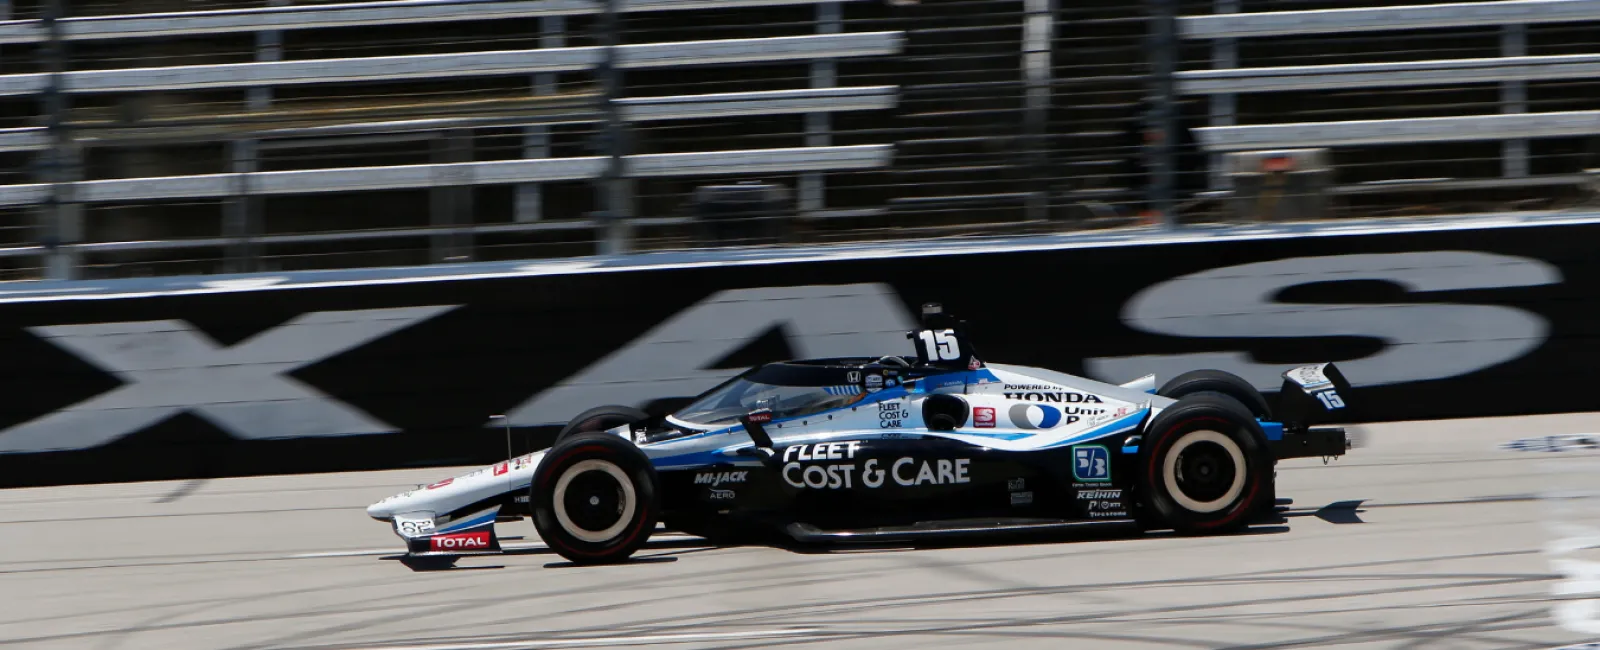 Rahal Hindered By Car Issue On Grid, Finishes 17th at Season Opener